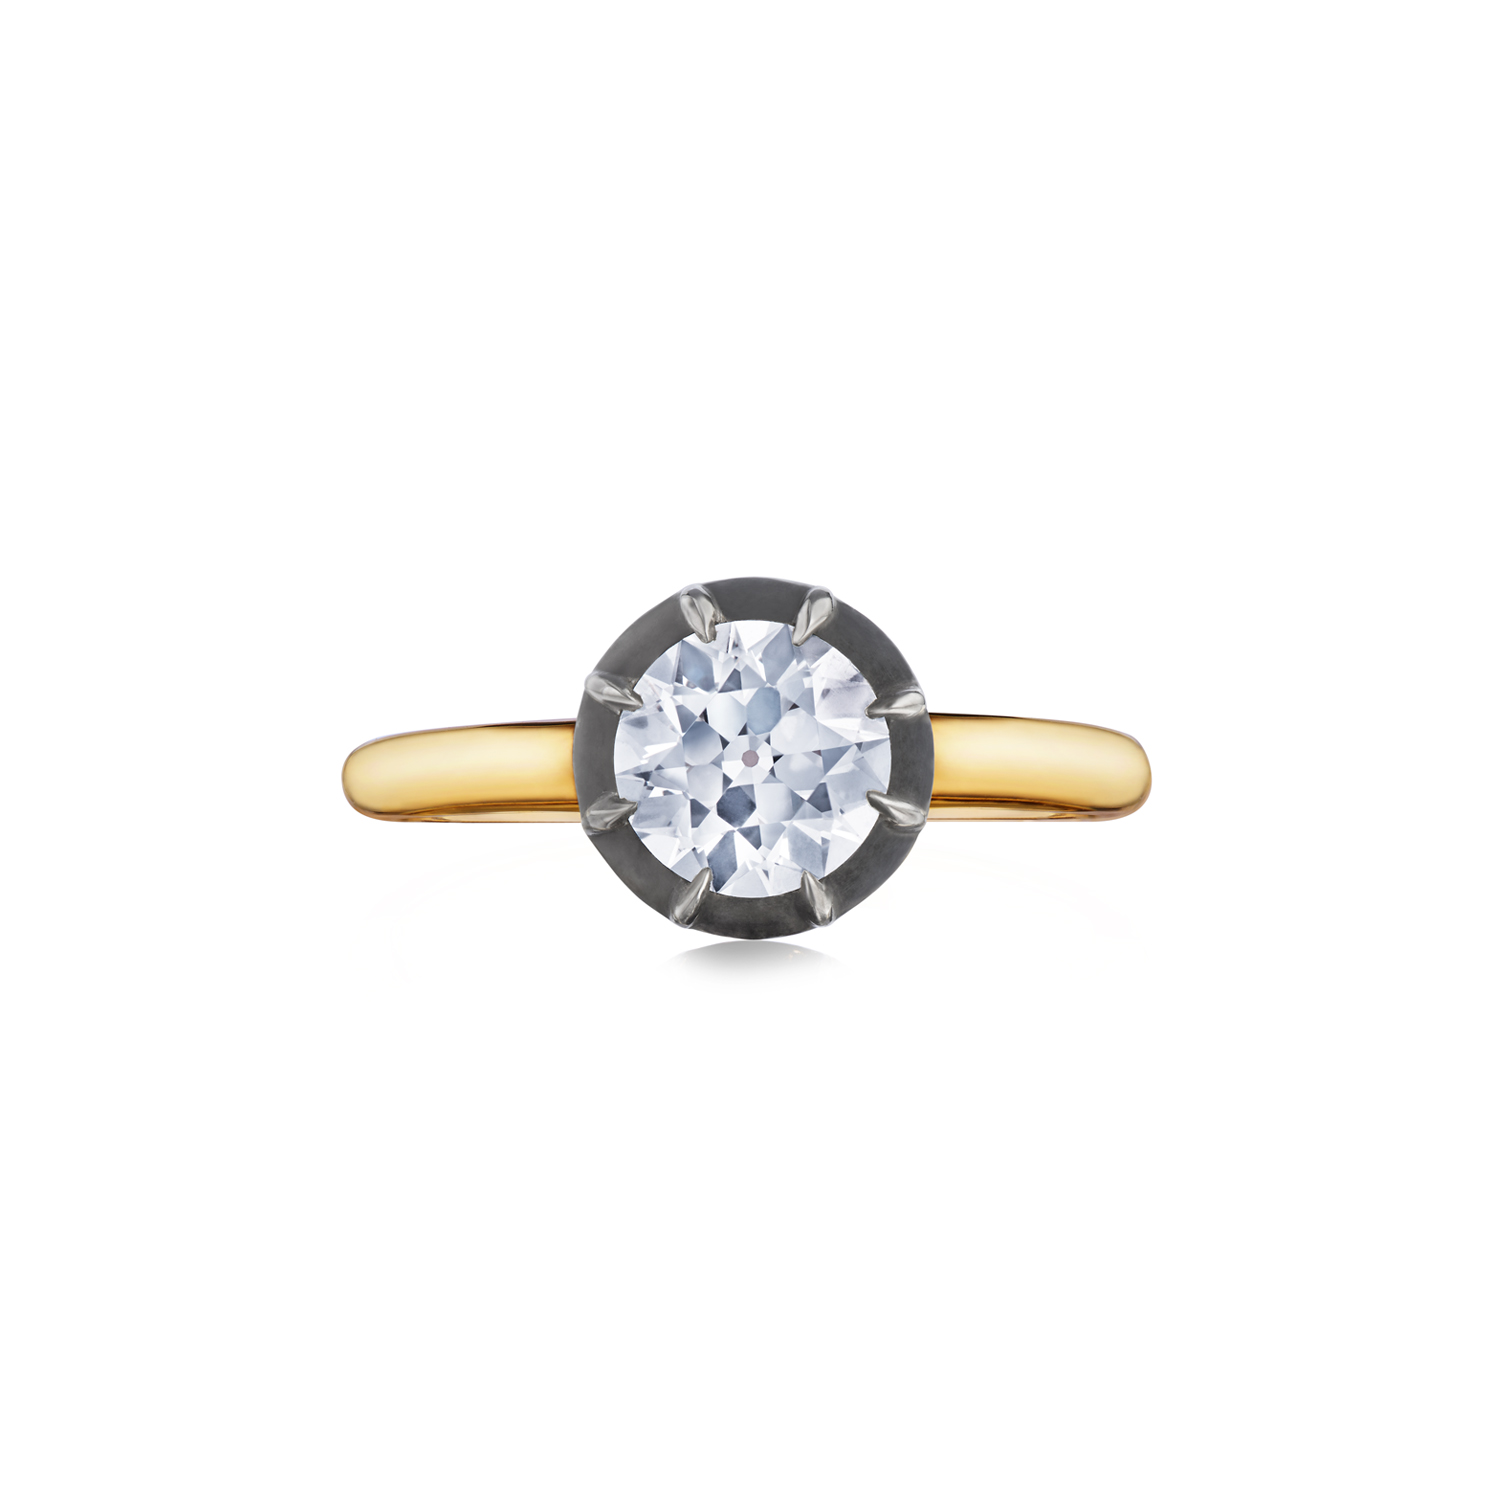 Fred Leighton Round Diamond Ring in an Antique Style Collet Setting in Silver Topped Yellow Gold, Style F-1057FLOE-0-DIA-SVGO